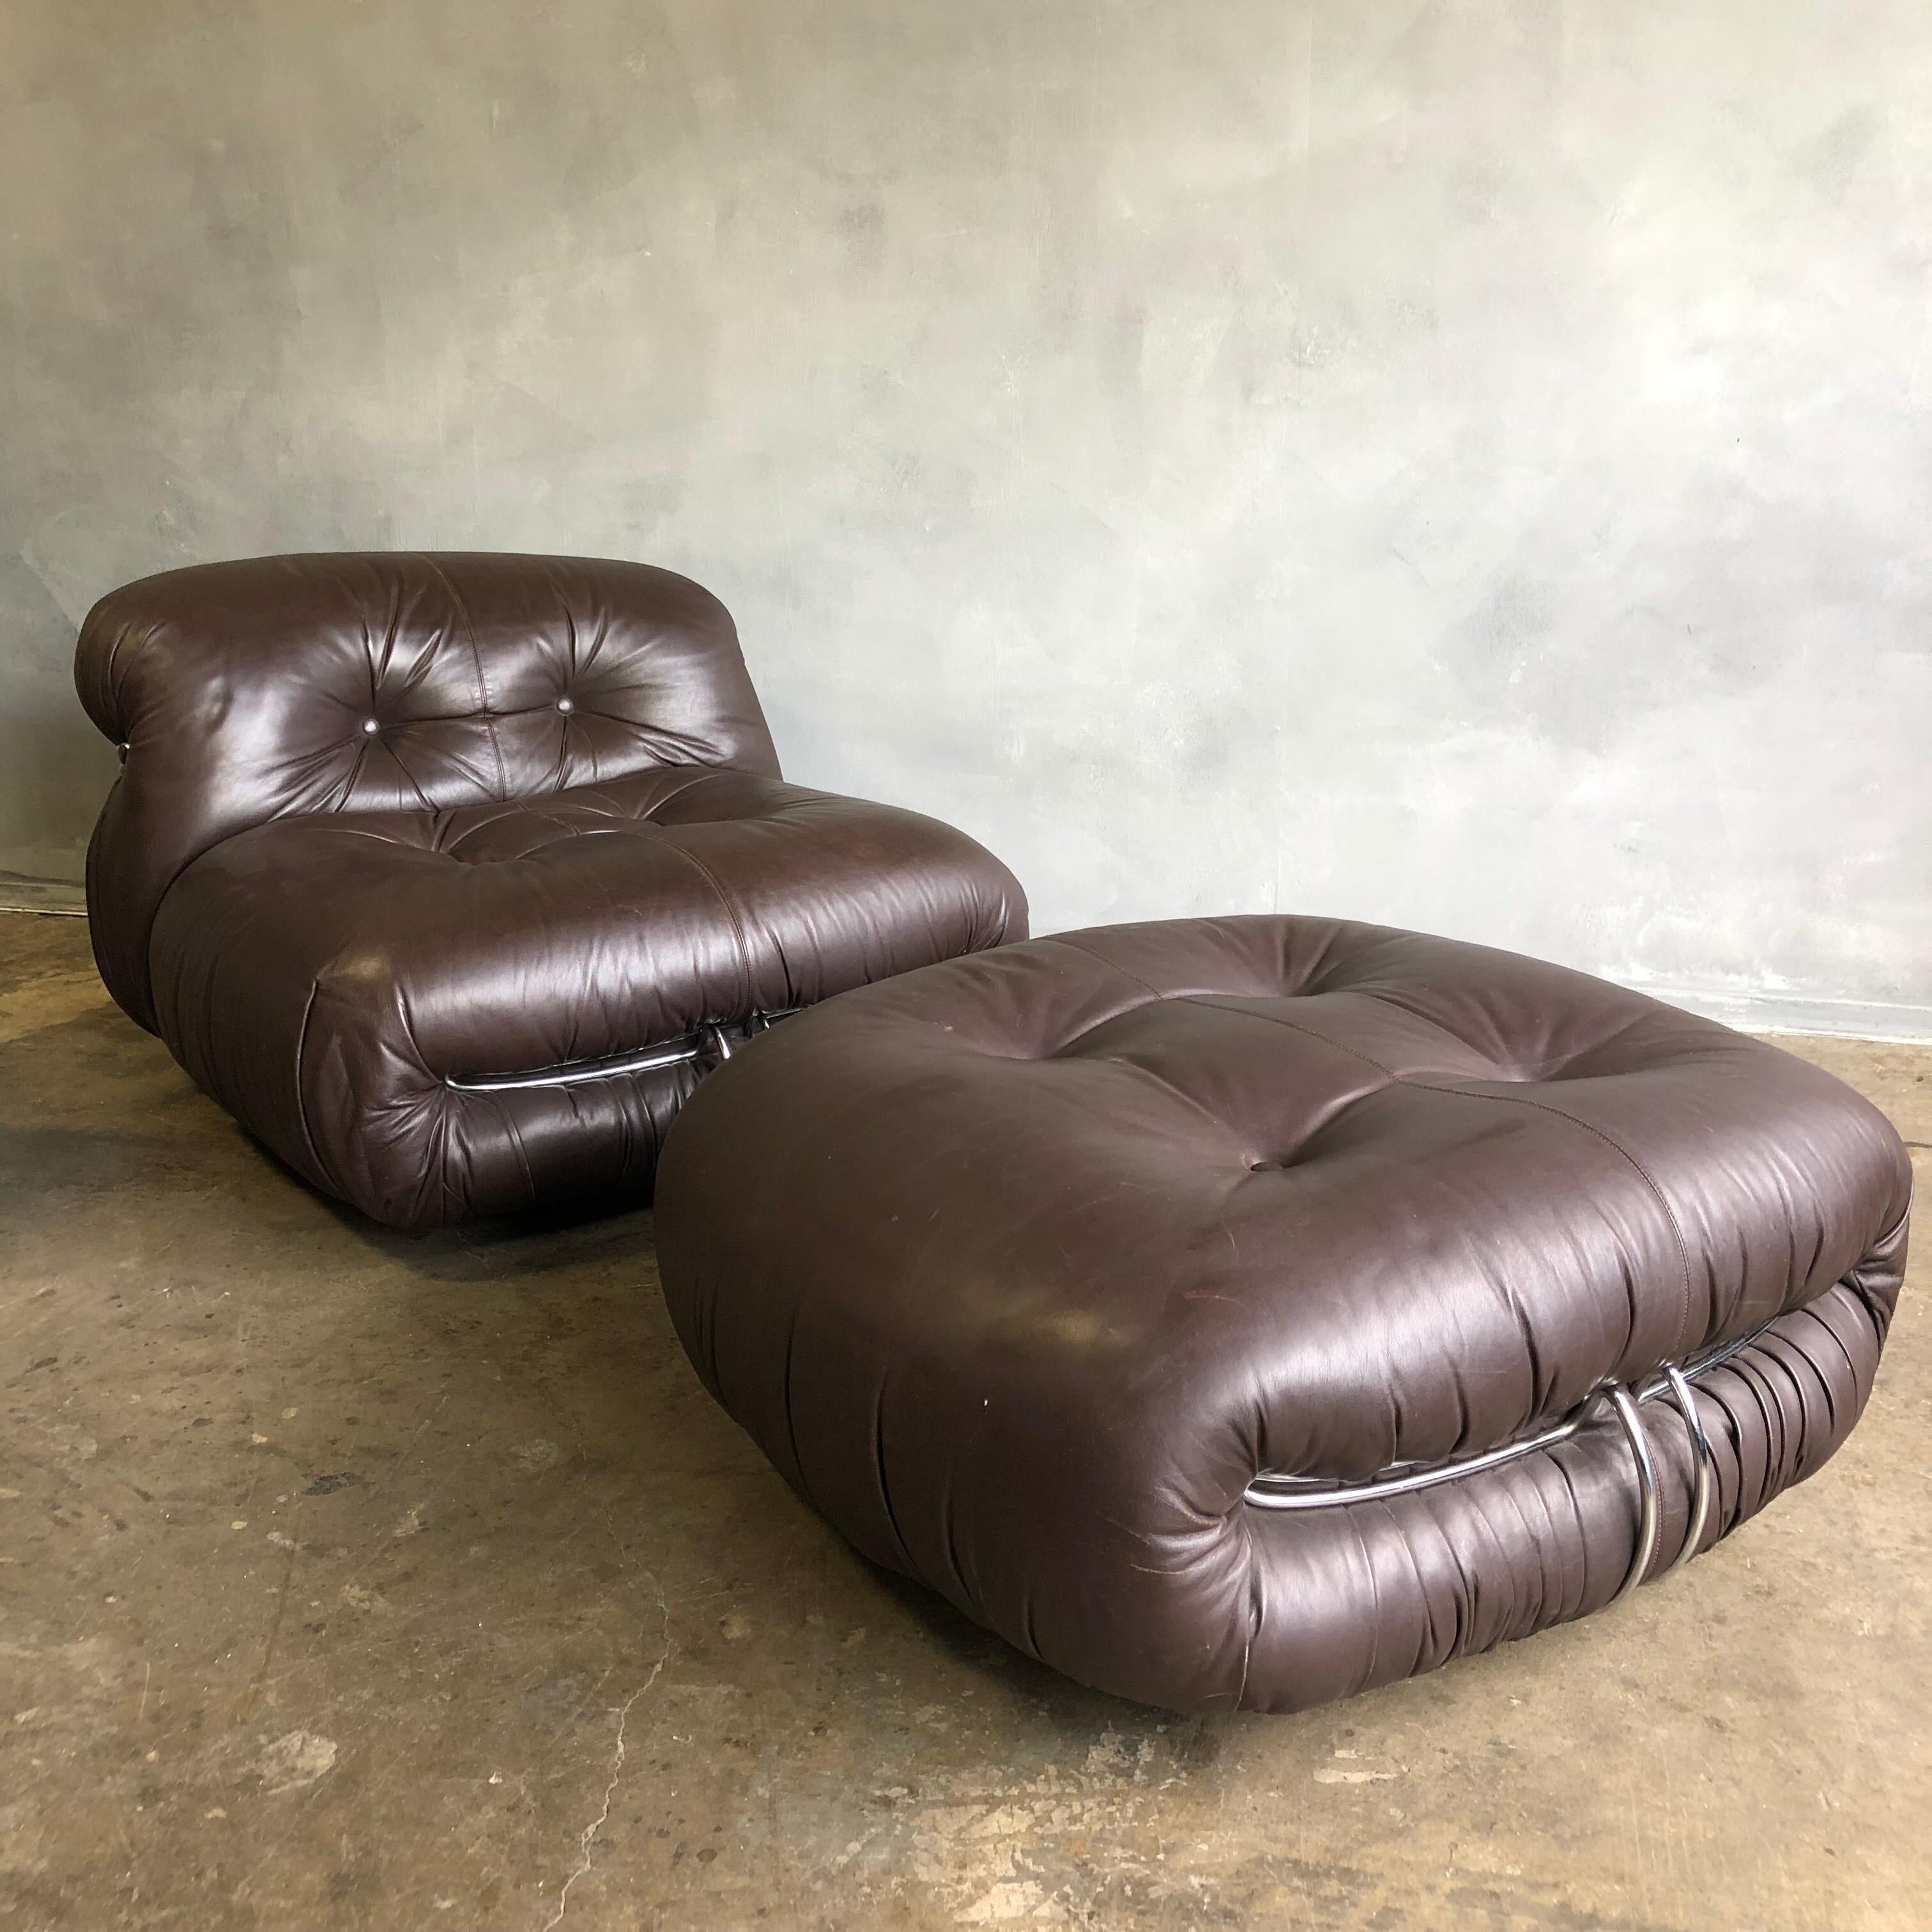 20th Century Midcentury Soriana Lounge Chair and Ottoman by Tobia Scarpa for Cassina